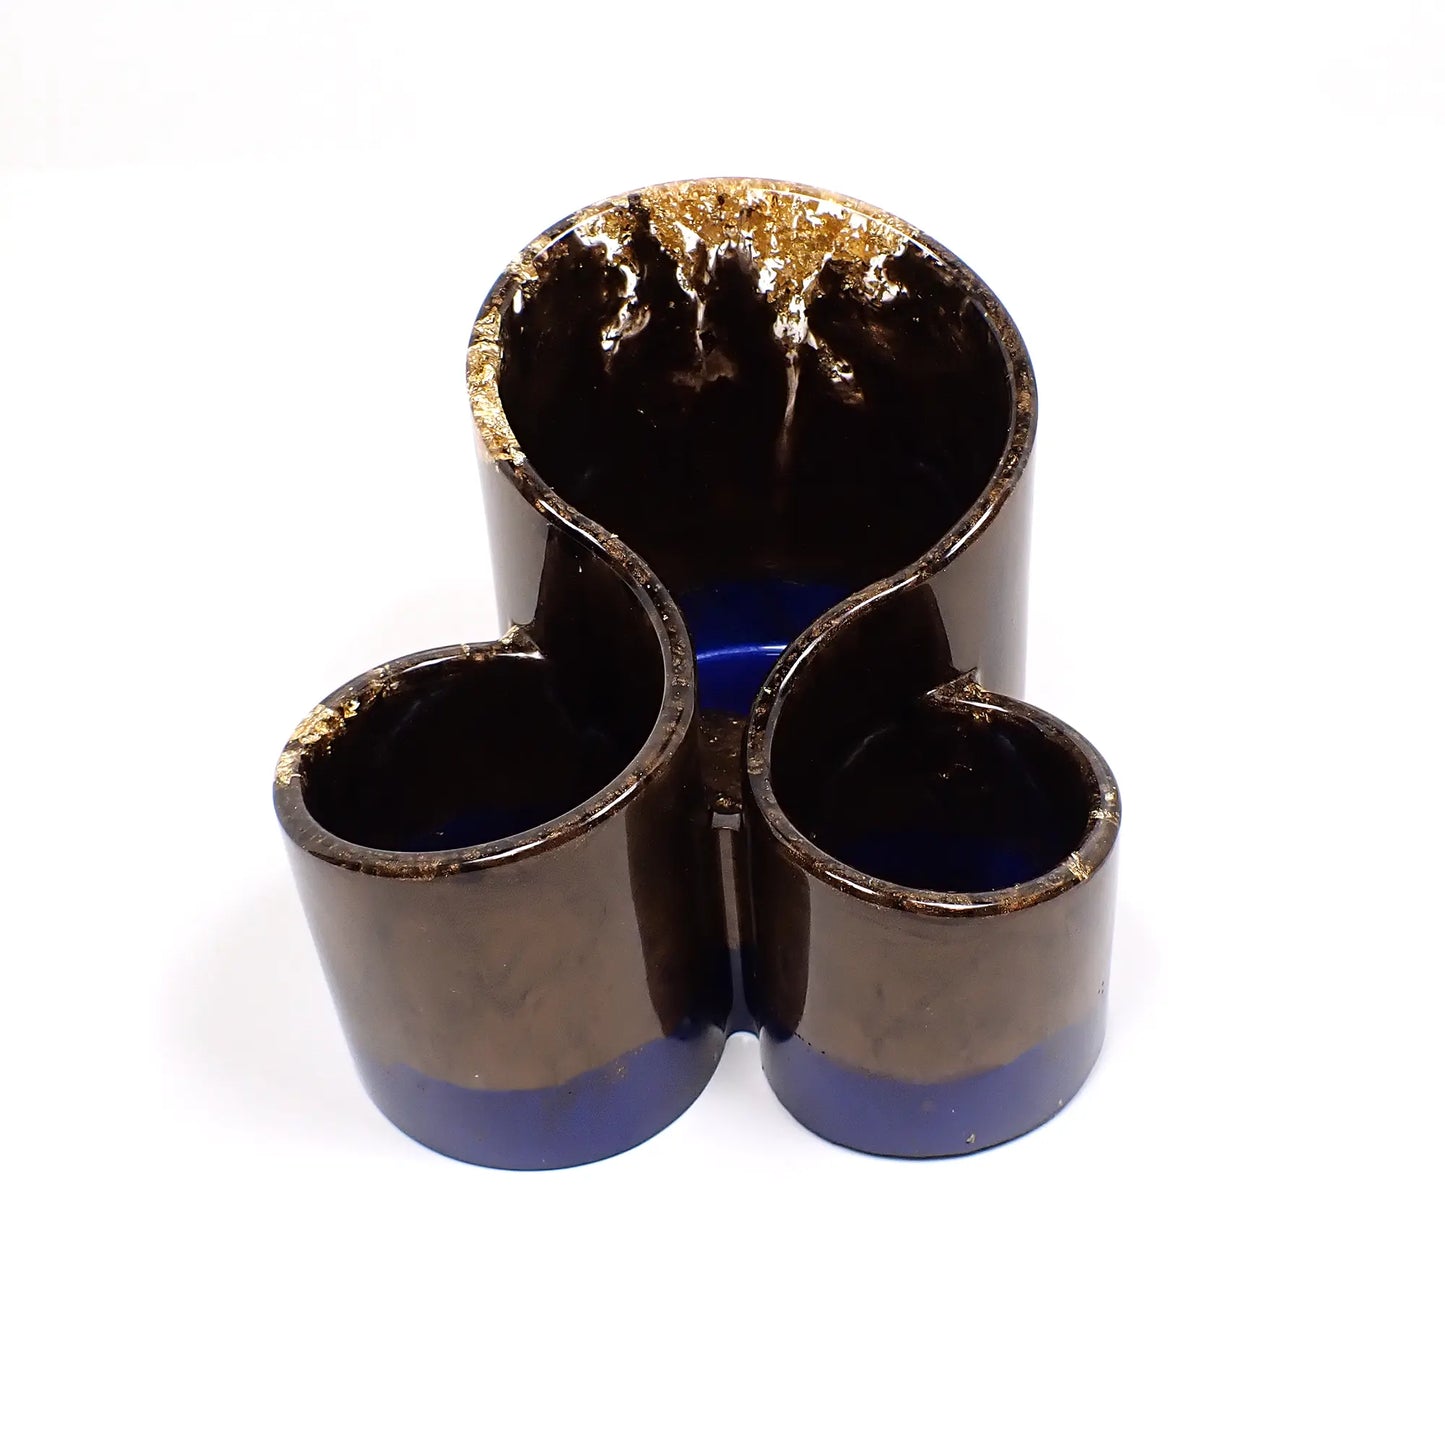 Handmade Brown and Dark Blue Pearly Resin Makeup Brush Holder with Metallic Gold Flakes